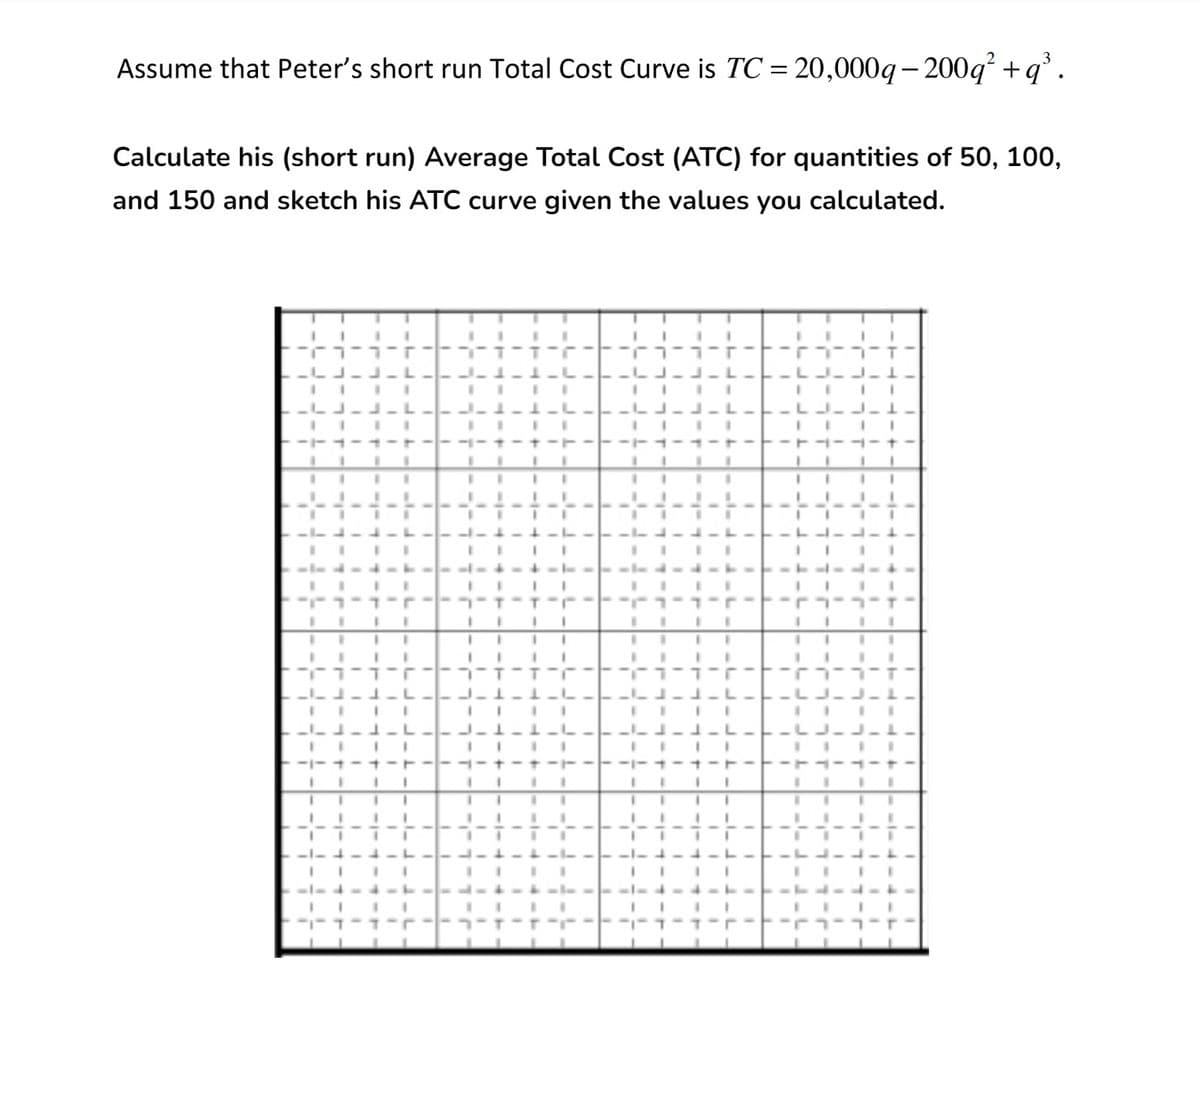 Assume that Peter's short run Total Cost Curve is TC = 20,000q– 200q² +q° .
Calculate his (short run) Average Total Cost (ATC) for quantities of 50, 100,
and 150 and sketch his ATC curve given the values you calculated.
IIII
-LJ-J-L-
-LJ-J-1-
IIII
IIII
-TT-1 ----- +-+-- -
-- 1-t-
11
3D
%3D
- -+ --
- -- -4
%3D
ד - ררו
T-T-r-
%3D
%3D
%3D
%3D
%3D
+---
ー- +-ナー
ゴーキ-キート-
%3D
IIII
-L
